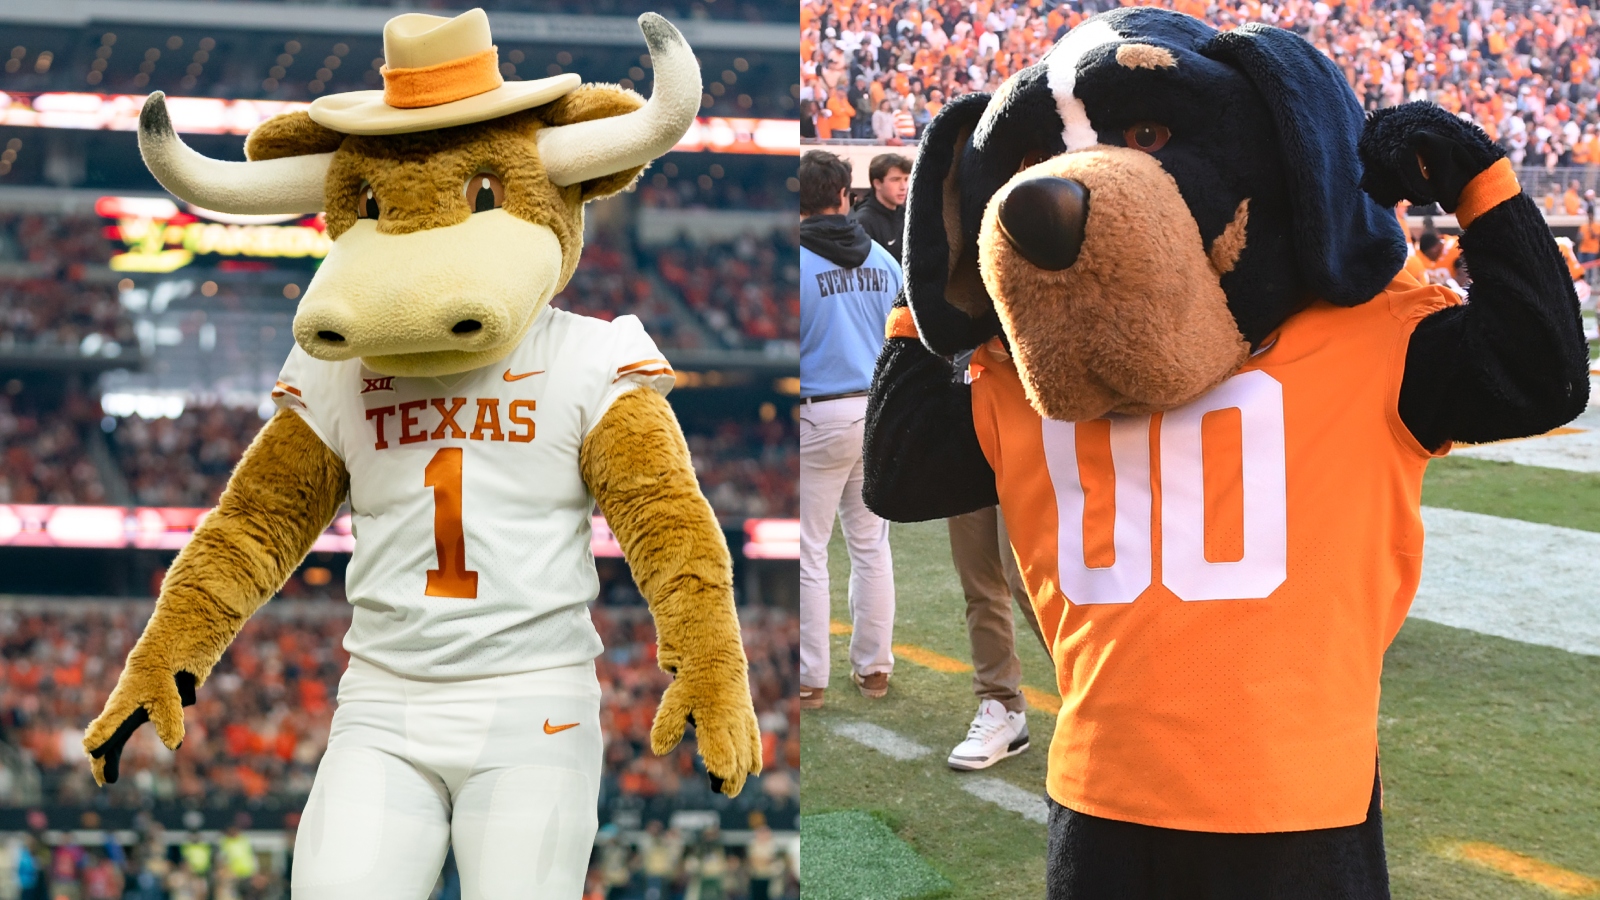 University of Texas and University of Tennessee mascots facing off